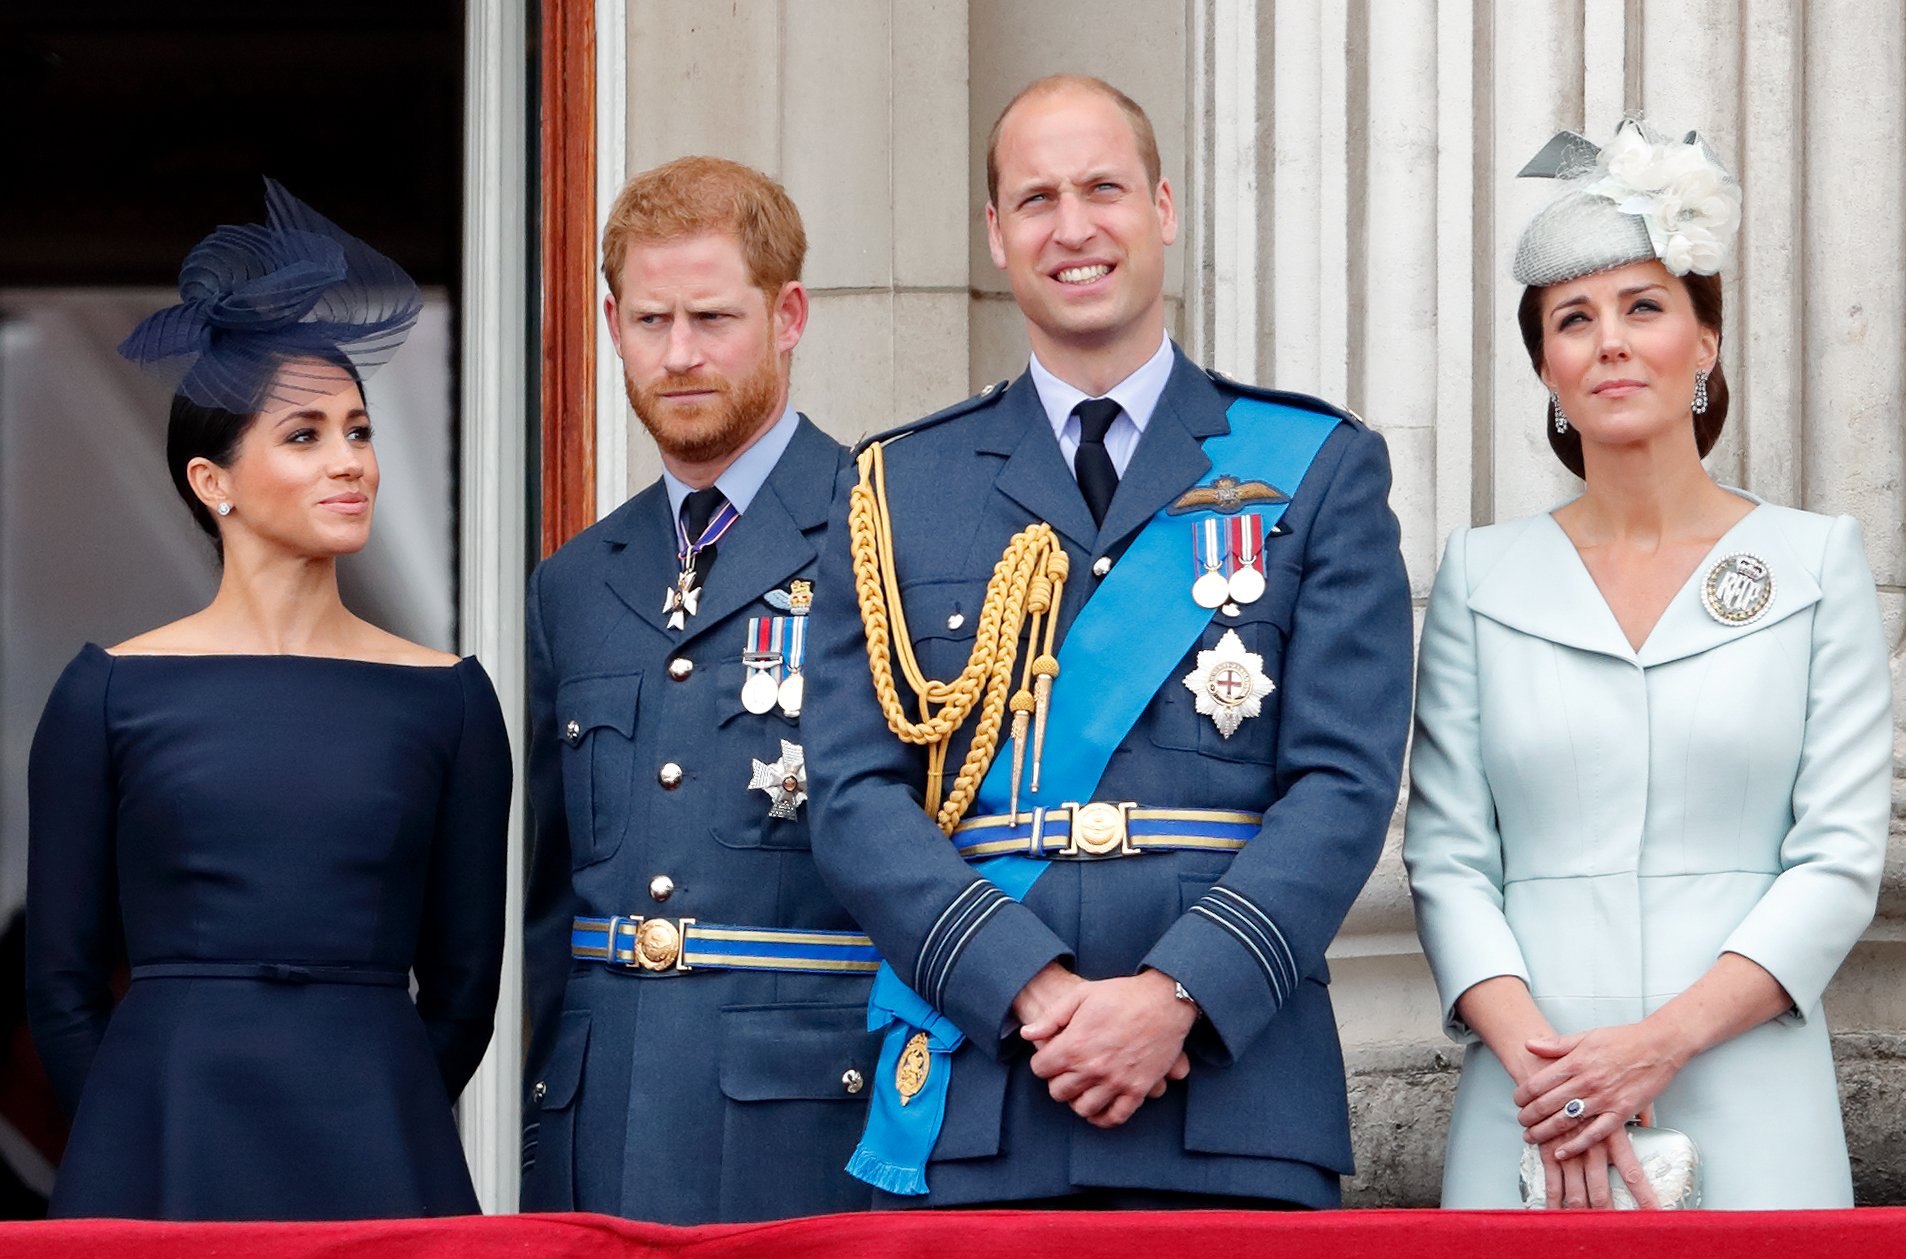 Meghan Markle, Prince Harry, Prince William and Kate Middleton watching a flypast from the balcony of Buckingham Palace on July 10, 2018 in London, England. / Source: Getty Images